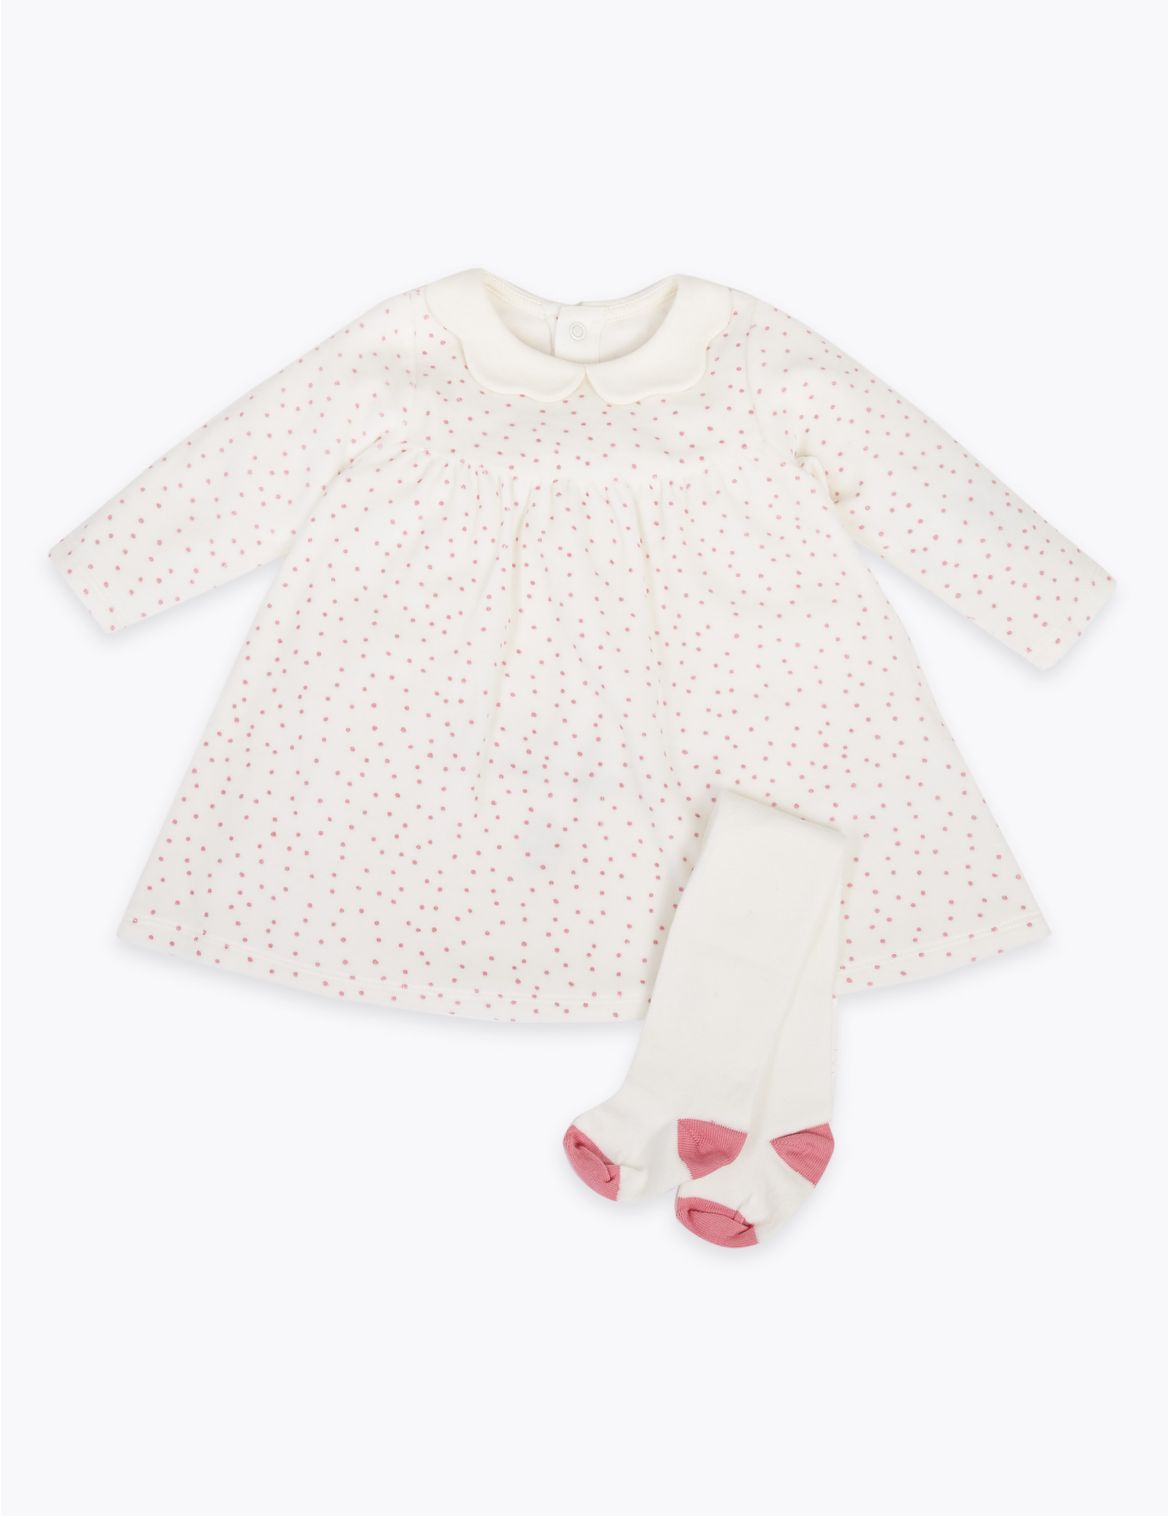 2 Piece Cotton Velour Spotted Print Outfit (0-12 Mths) white